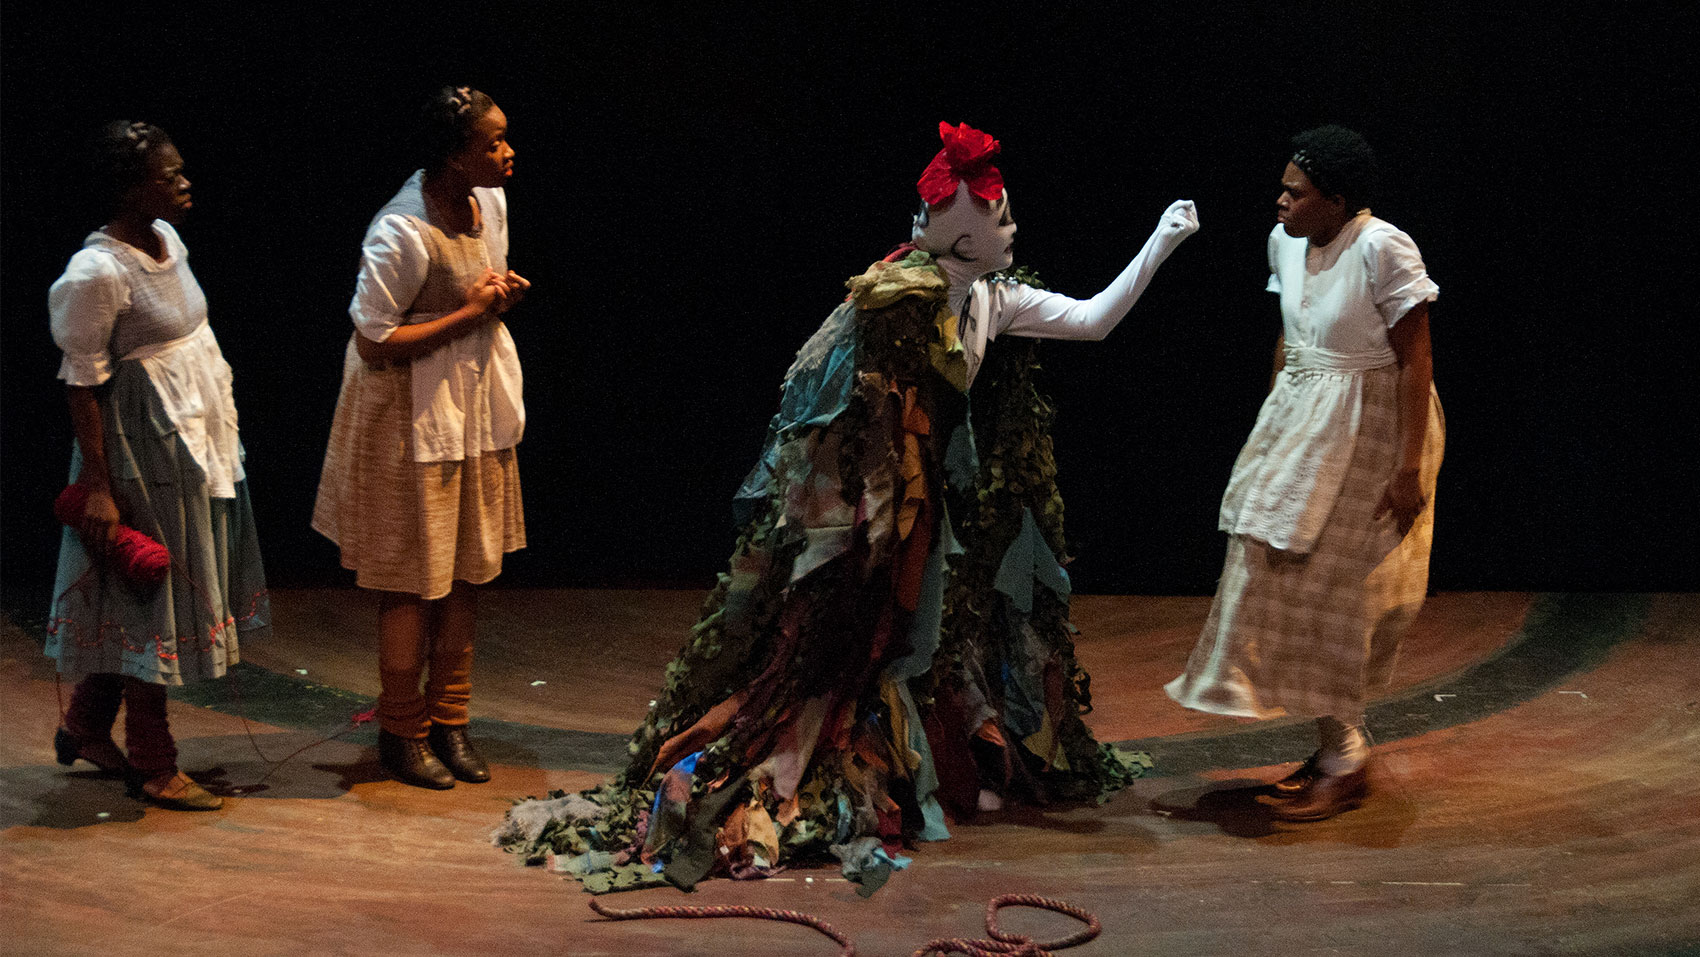 A creature that is solid white, covered in drawn symbols and a red flower on top of its head is wearing a cloak that resembles foliage and is holding a closed fist toward a woman who looks visibly frightened. Two women stand behind the creature, one talking and gesturing downward with her index finger while the other holds an unspooled roll of red yarn and looks on with her brow furrowed as if confused. 